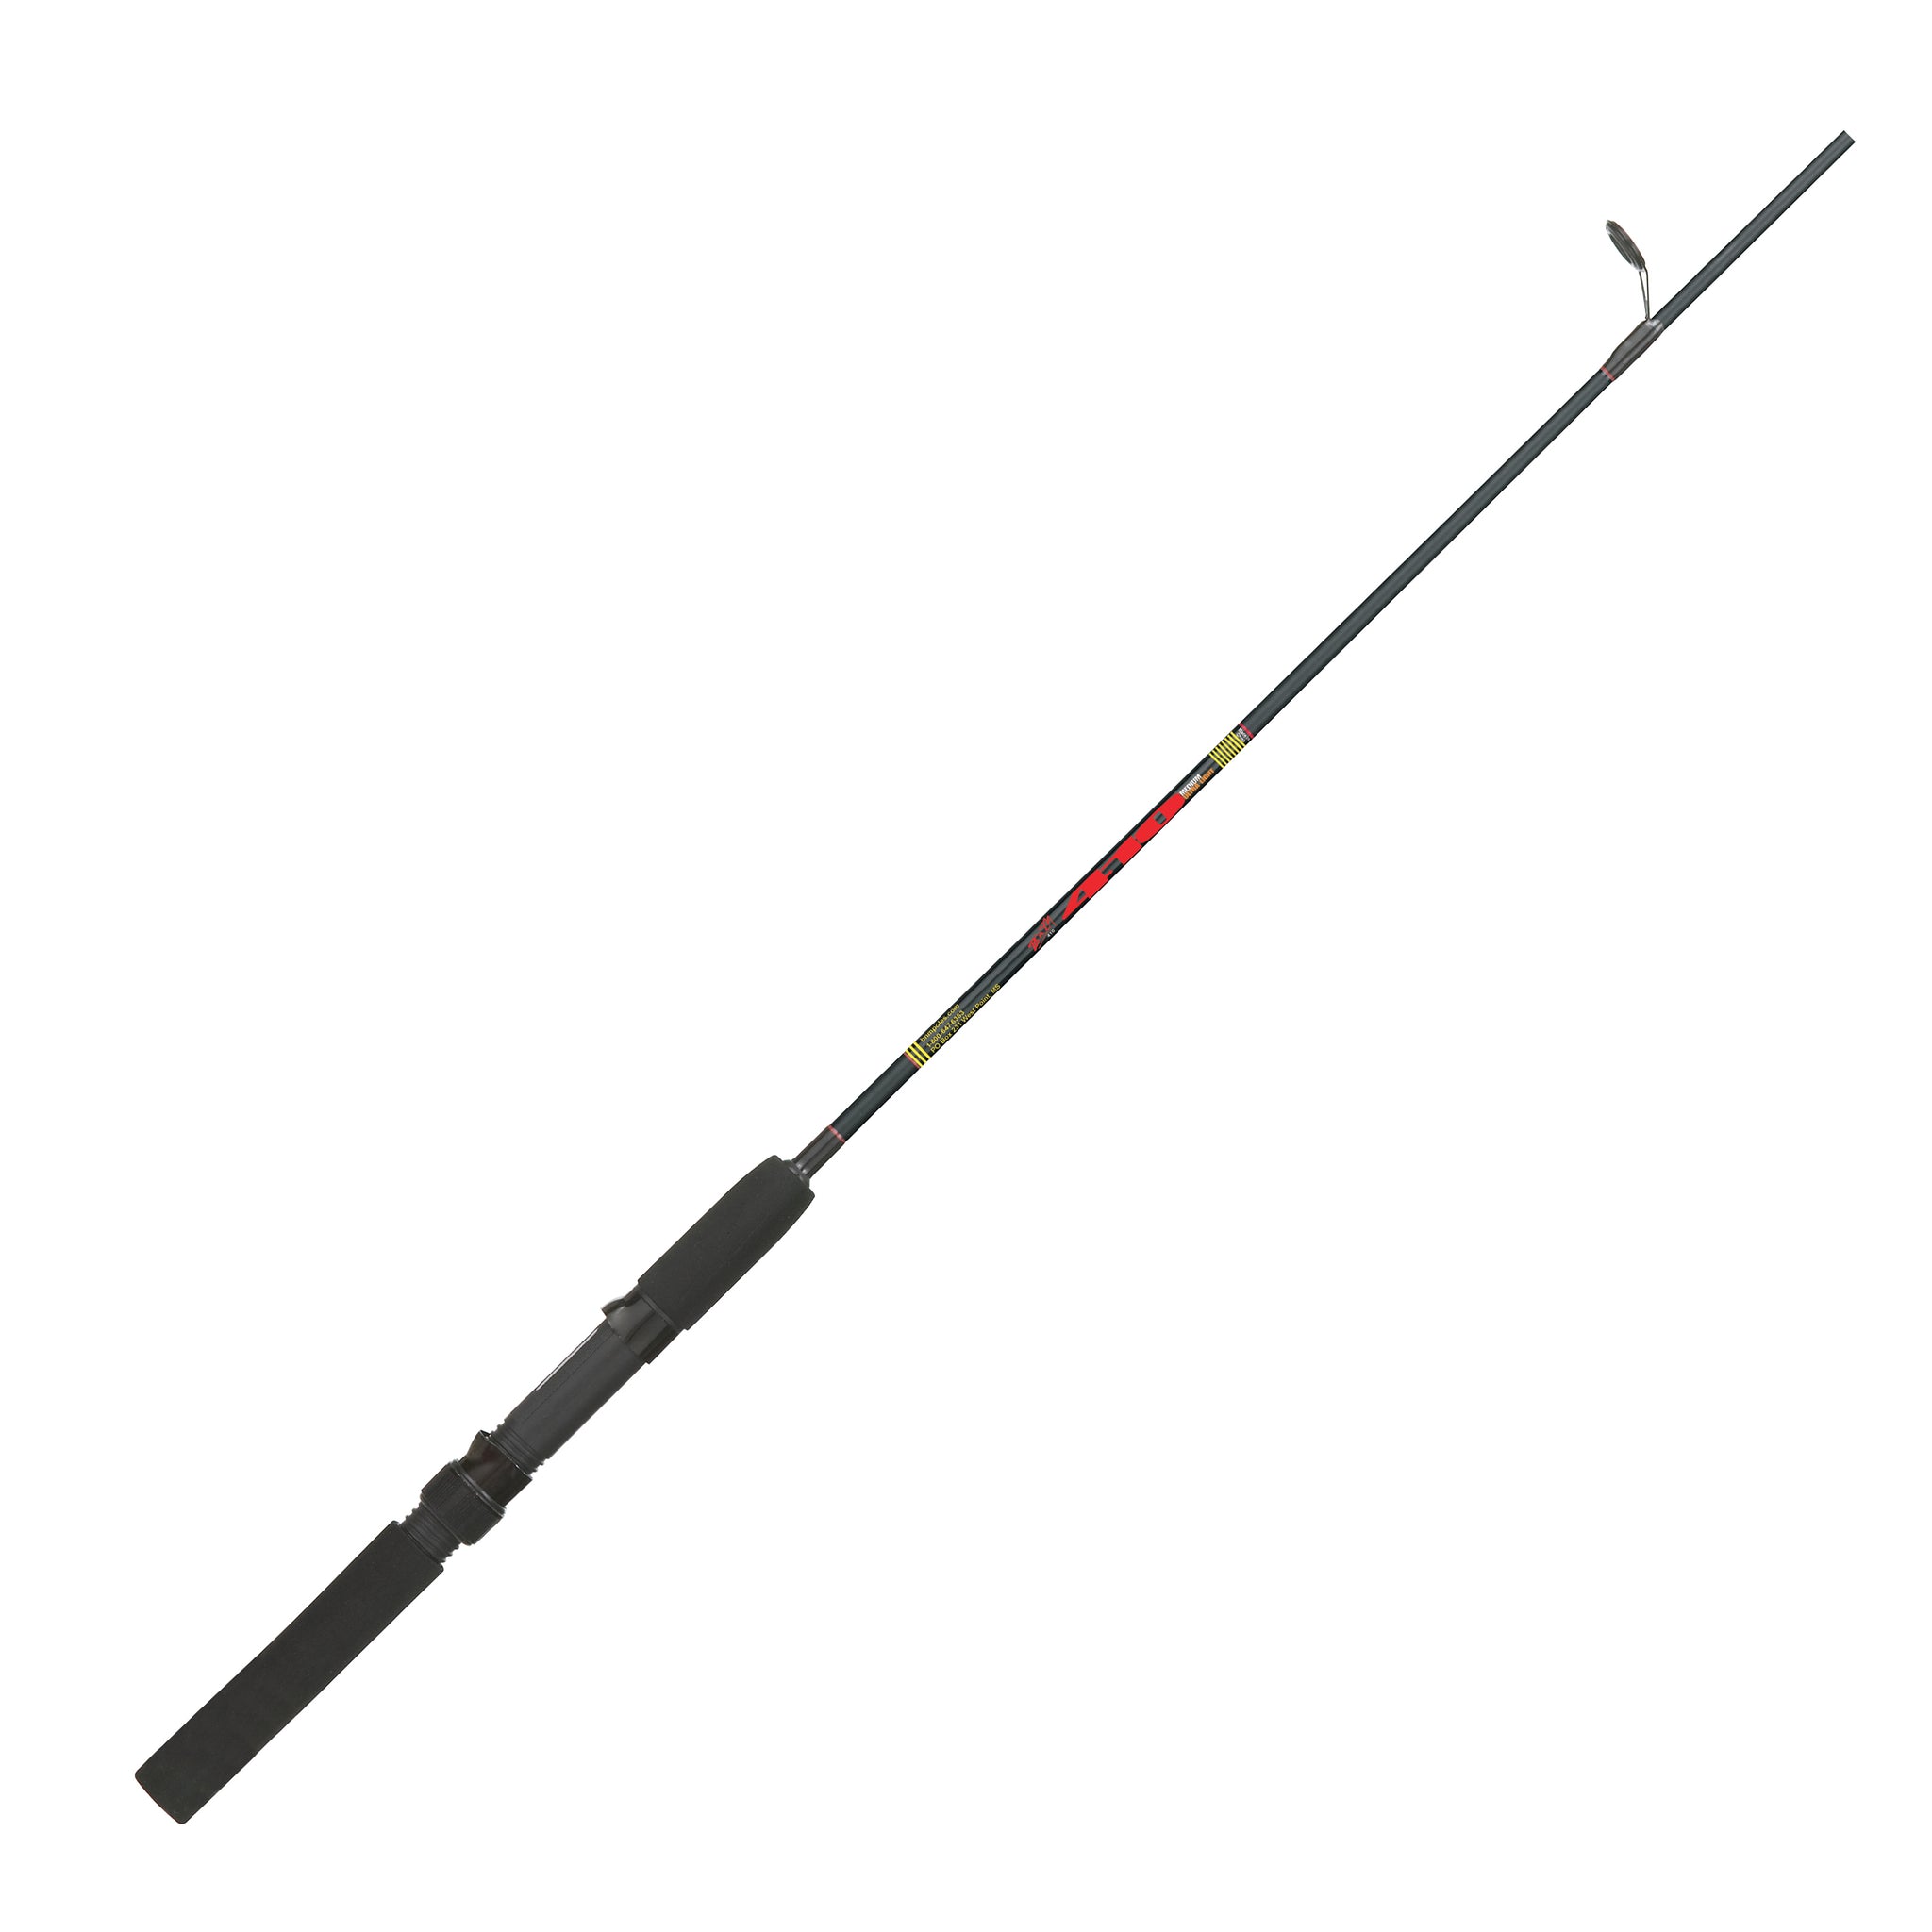 ul rod ultra light fishing, ul rod ultra light fishing Suppliers and  Manufacturers at